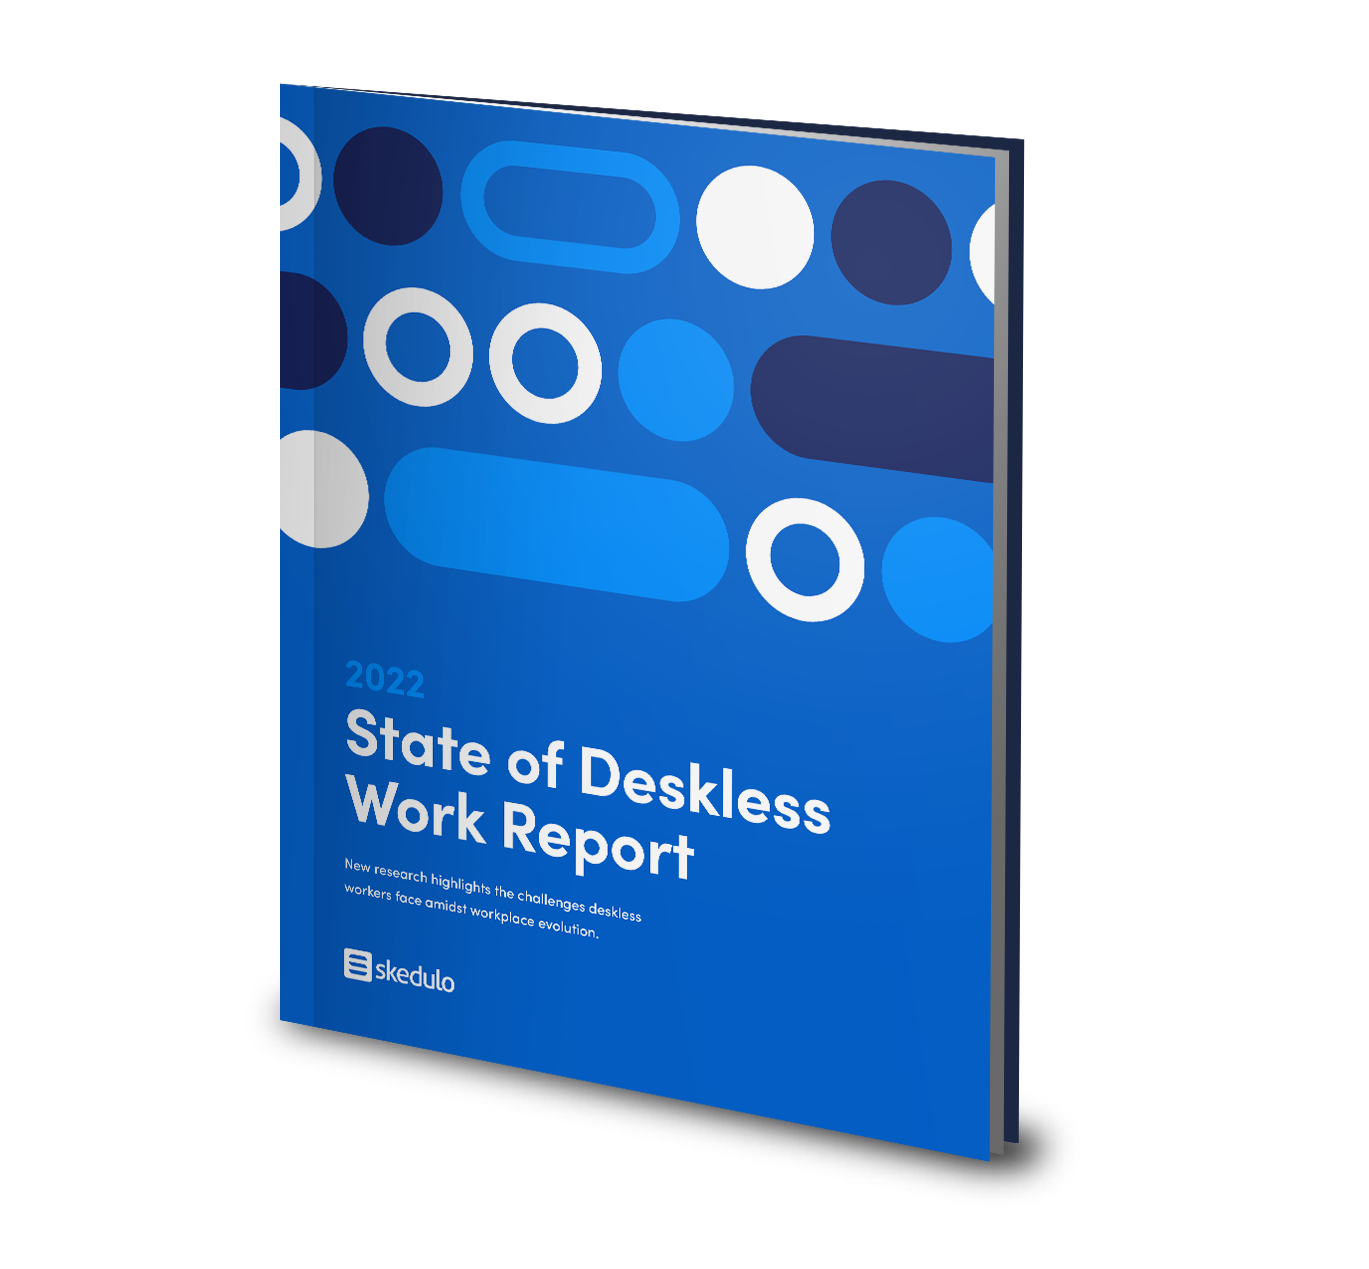 State of the Deskless Work Report 2022